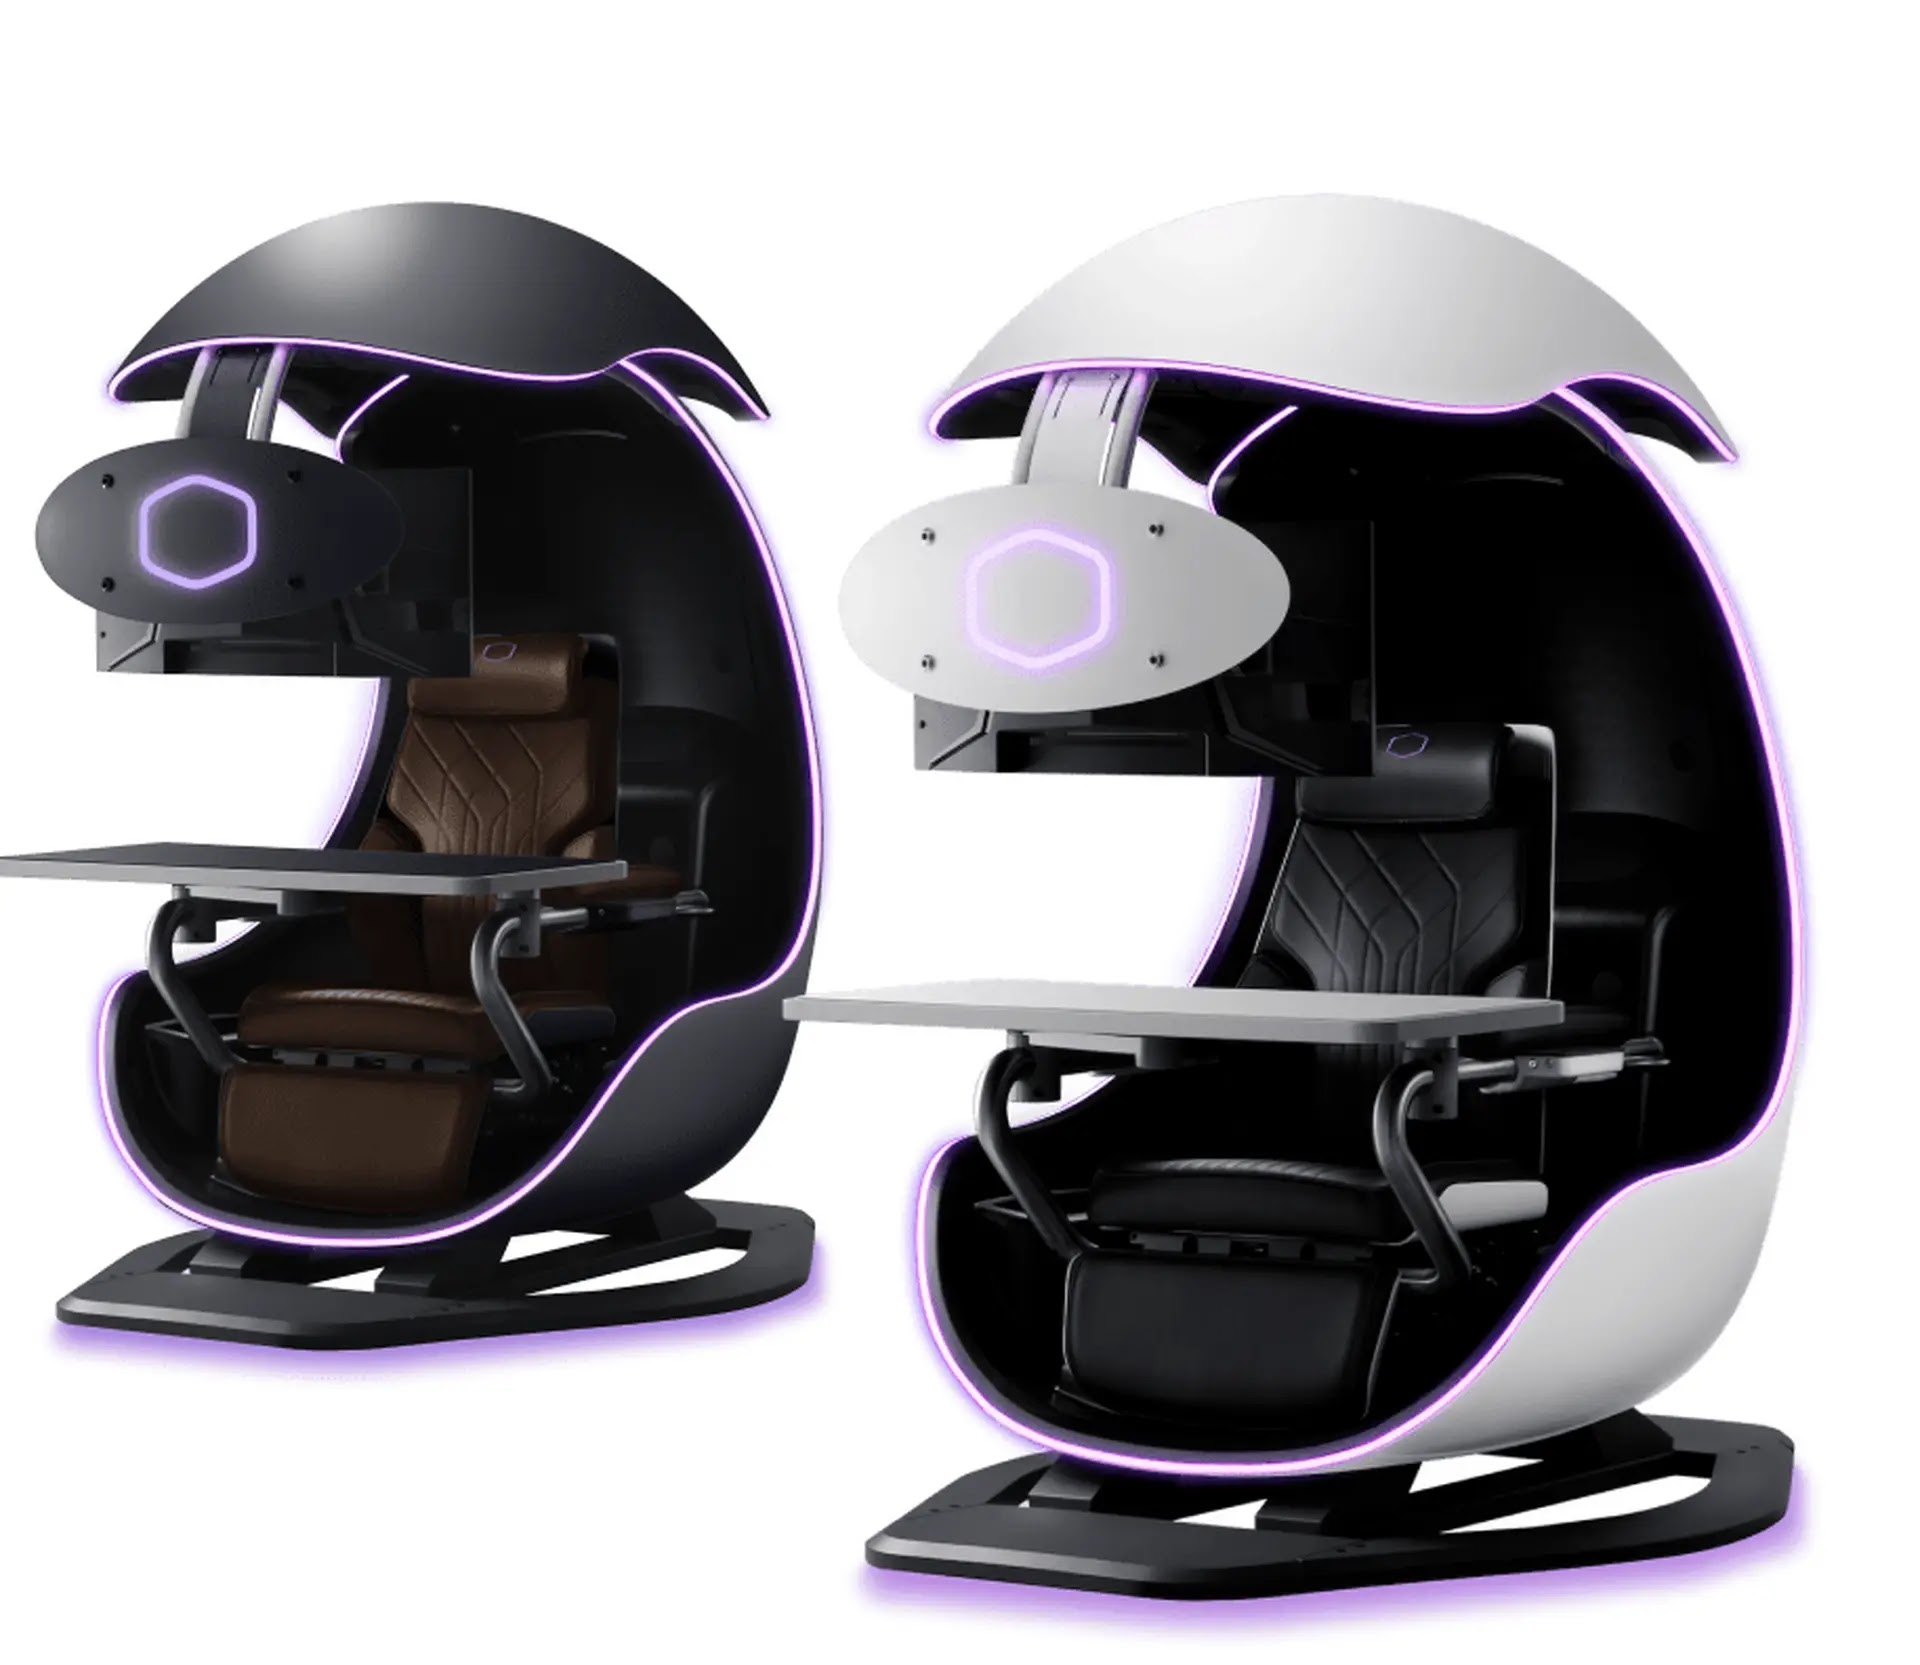 It's official: Cooler Master announces the Orb X gaming pod